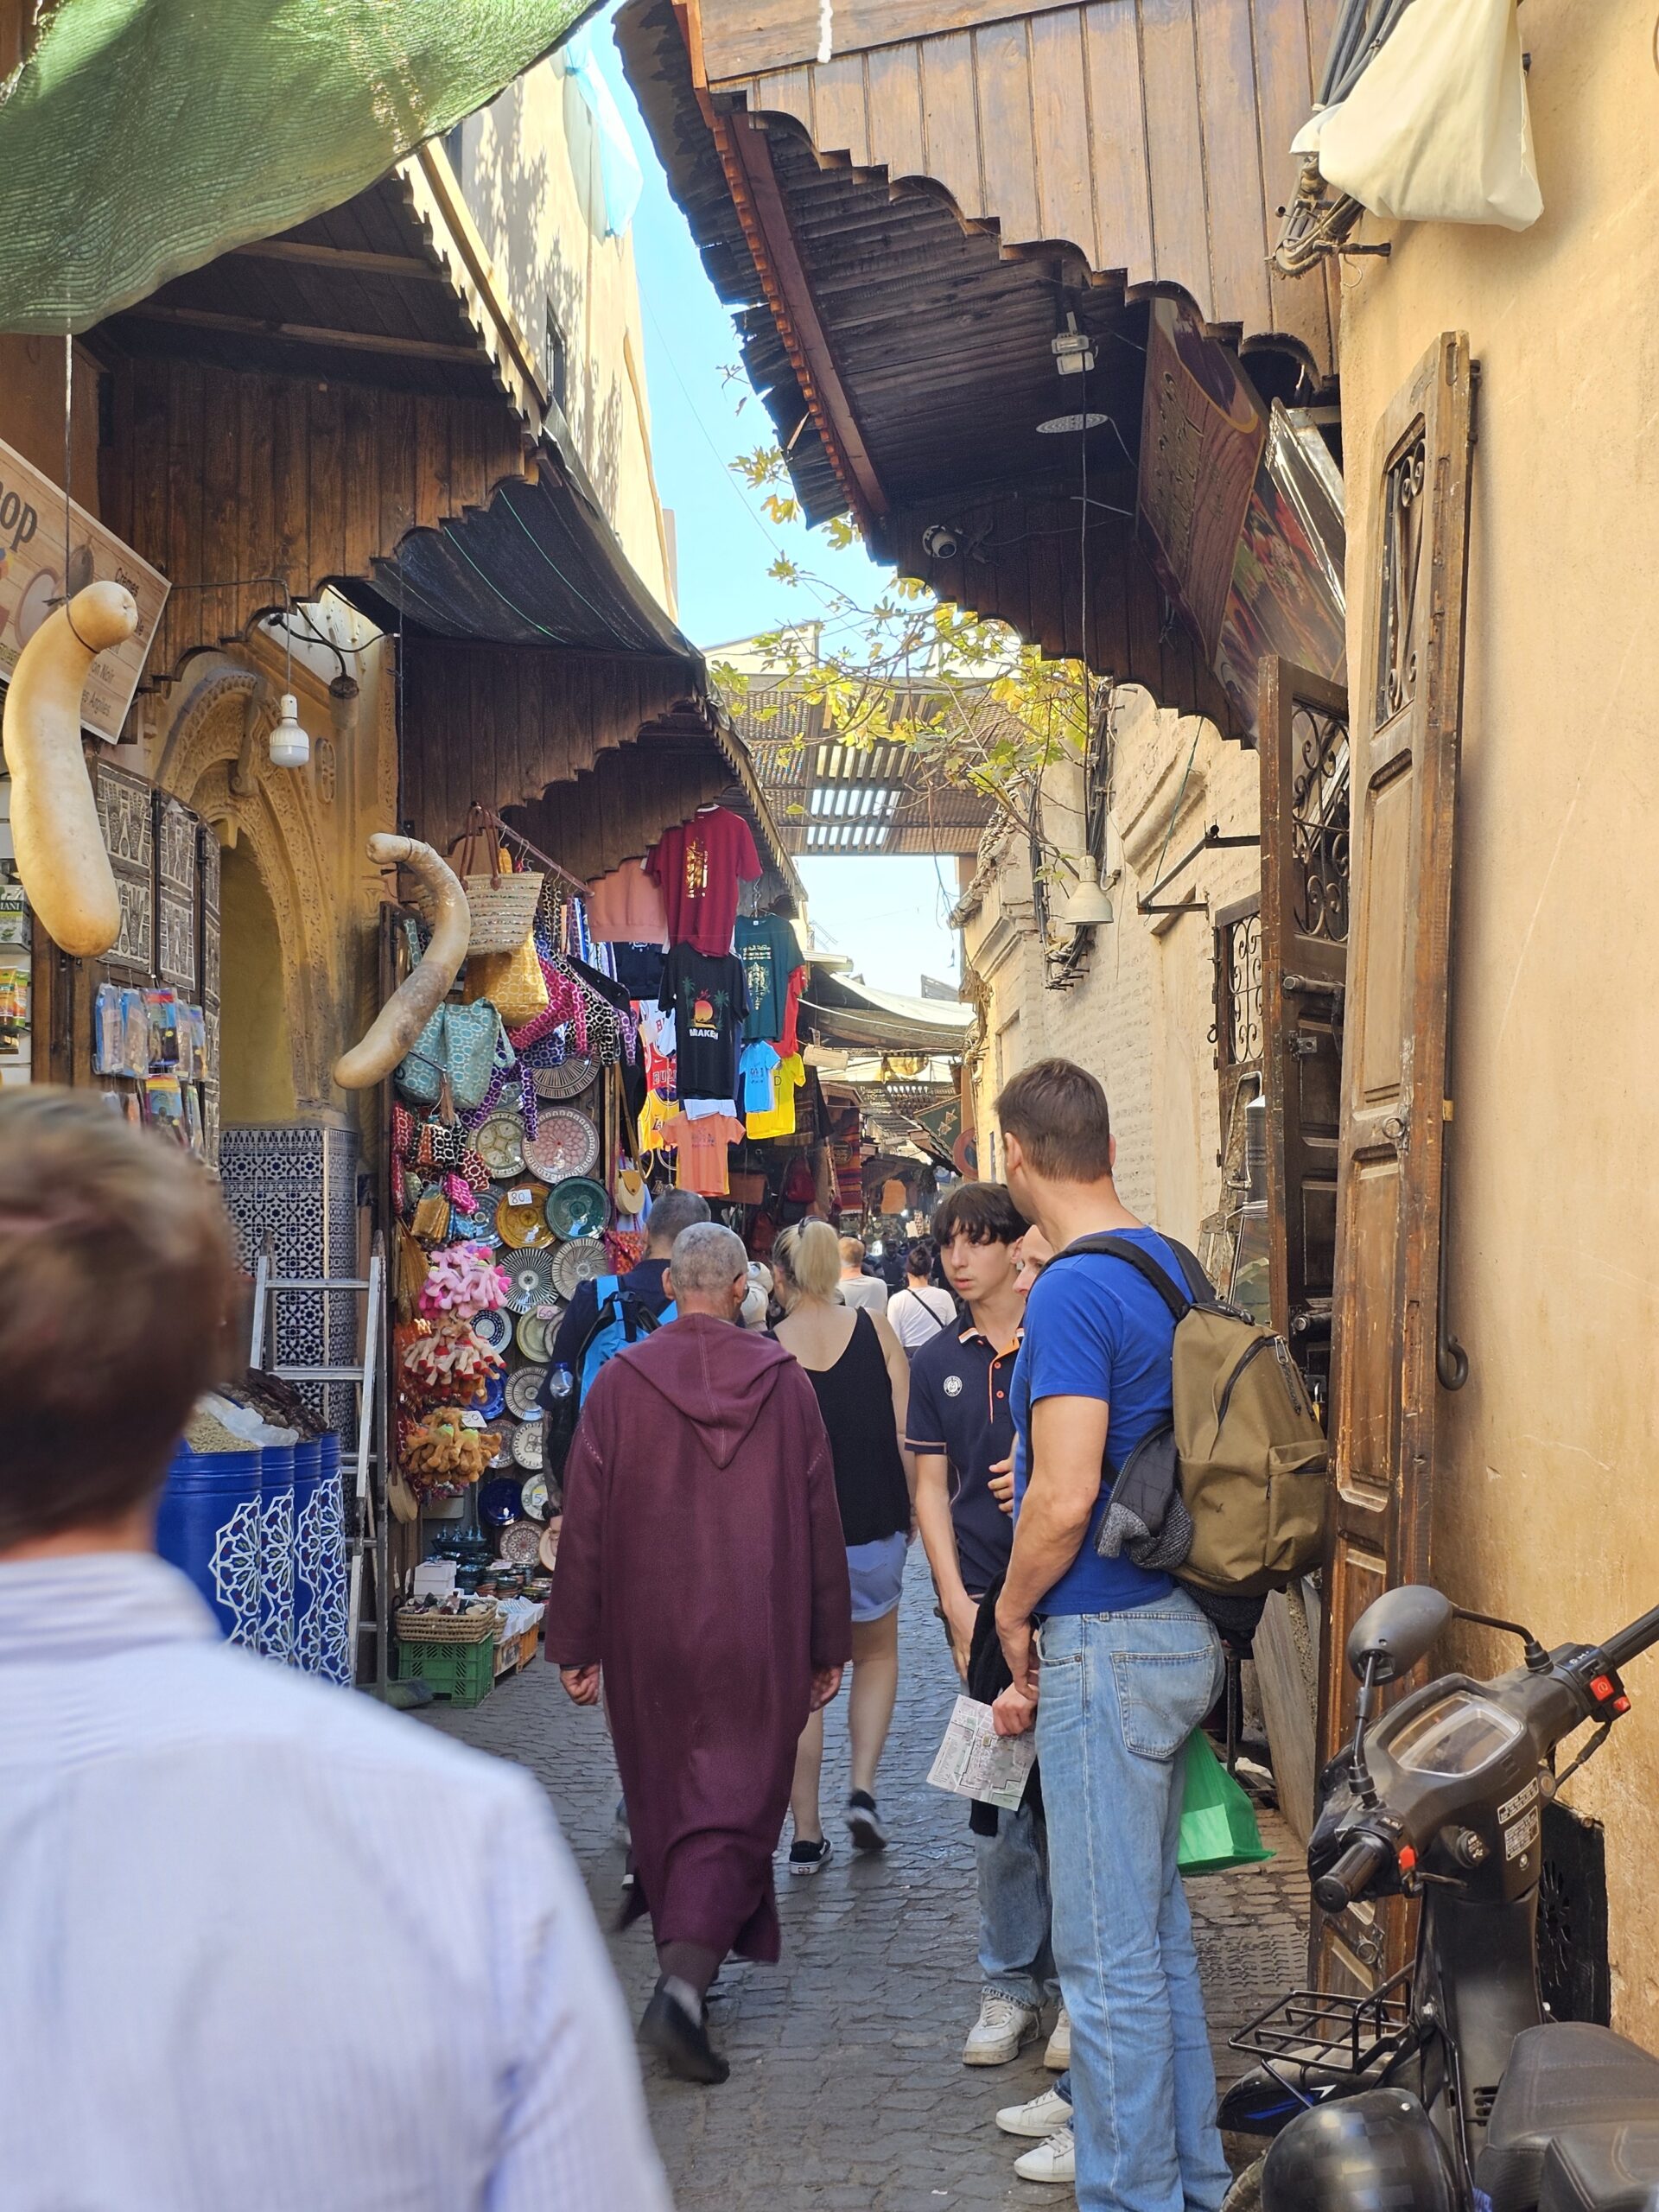 A small side street, one of many in Jemaa El Fnaa, Marrakesh. Image by 360onhistory.com